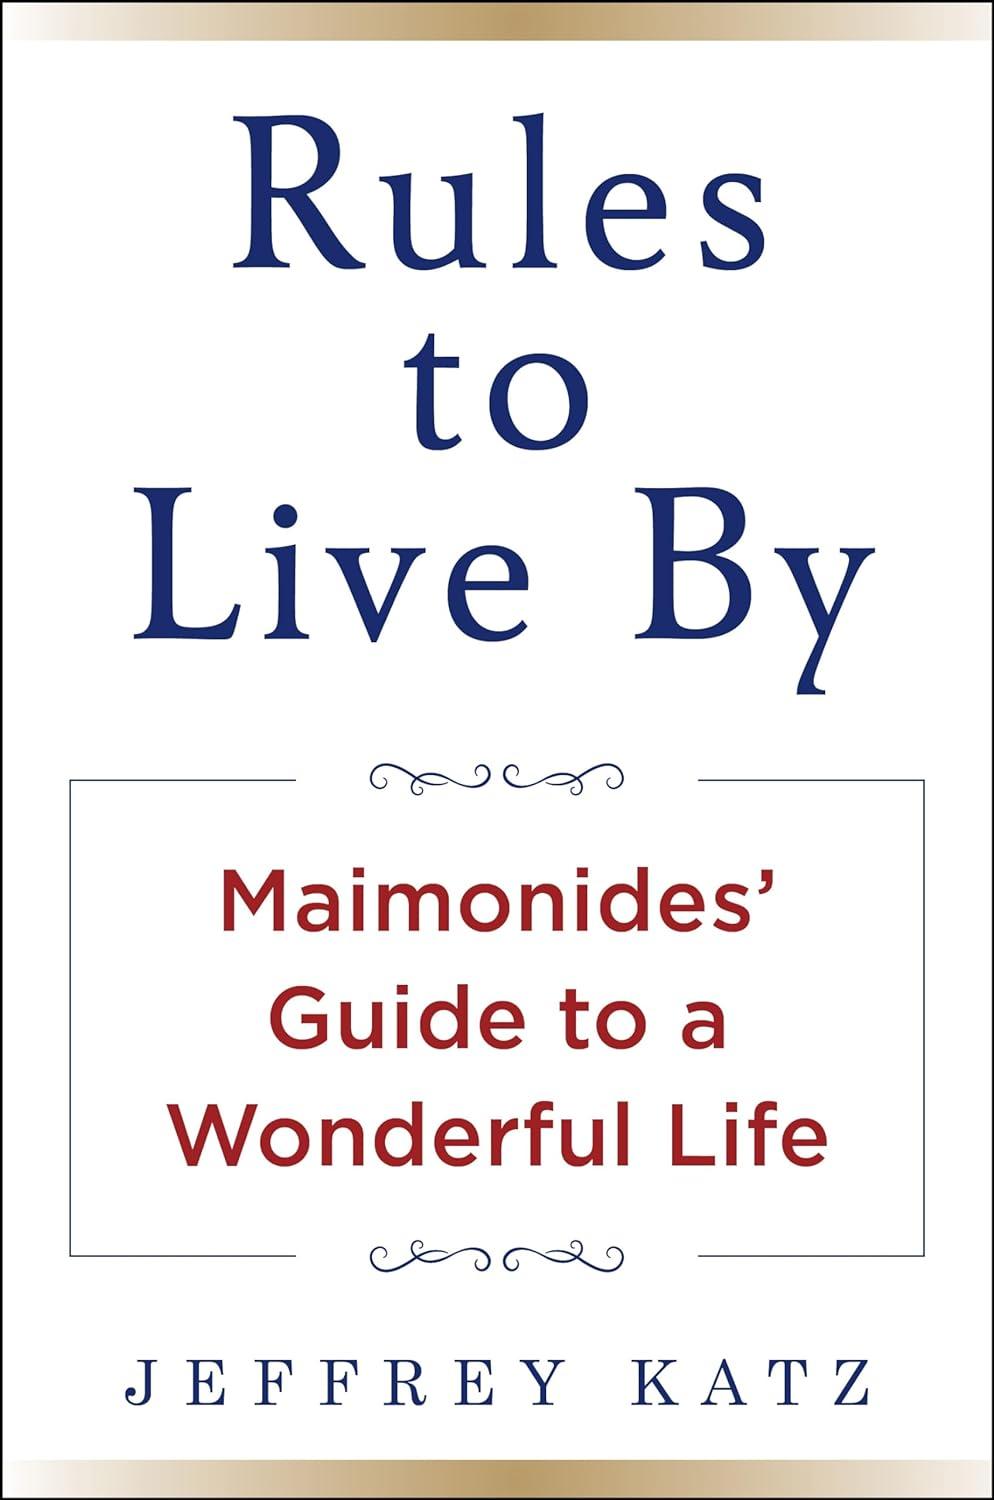 "Rules to Live By: Maimonides' Guide to a Wonderful Life," by Jeffrey Katz.